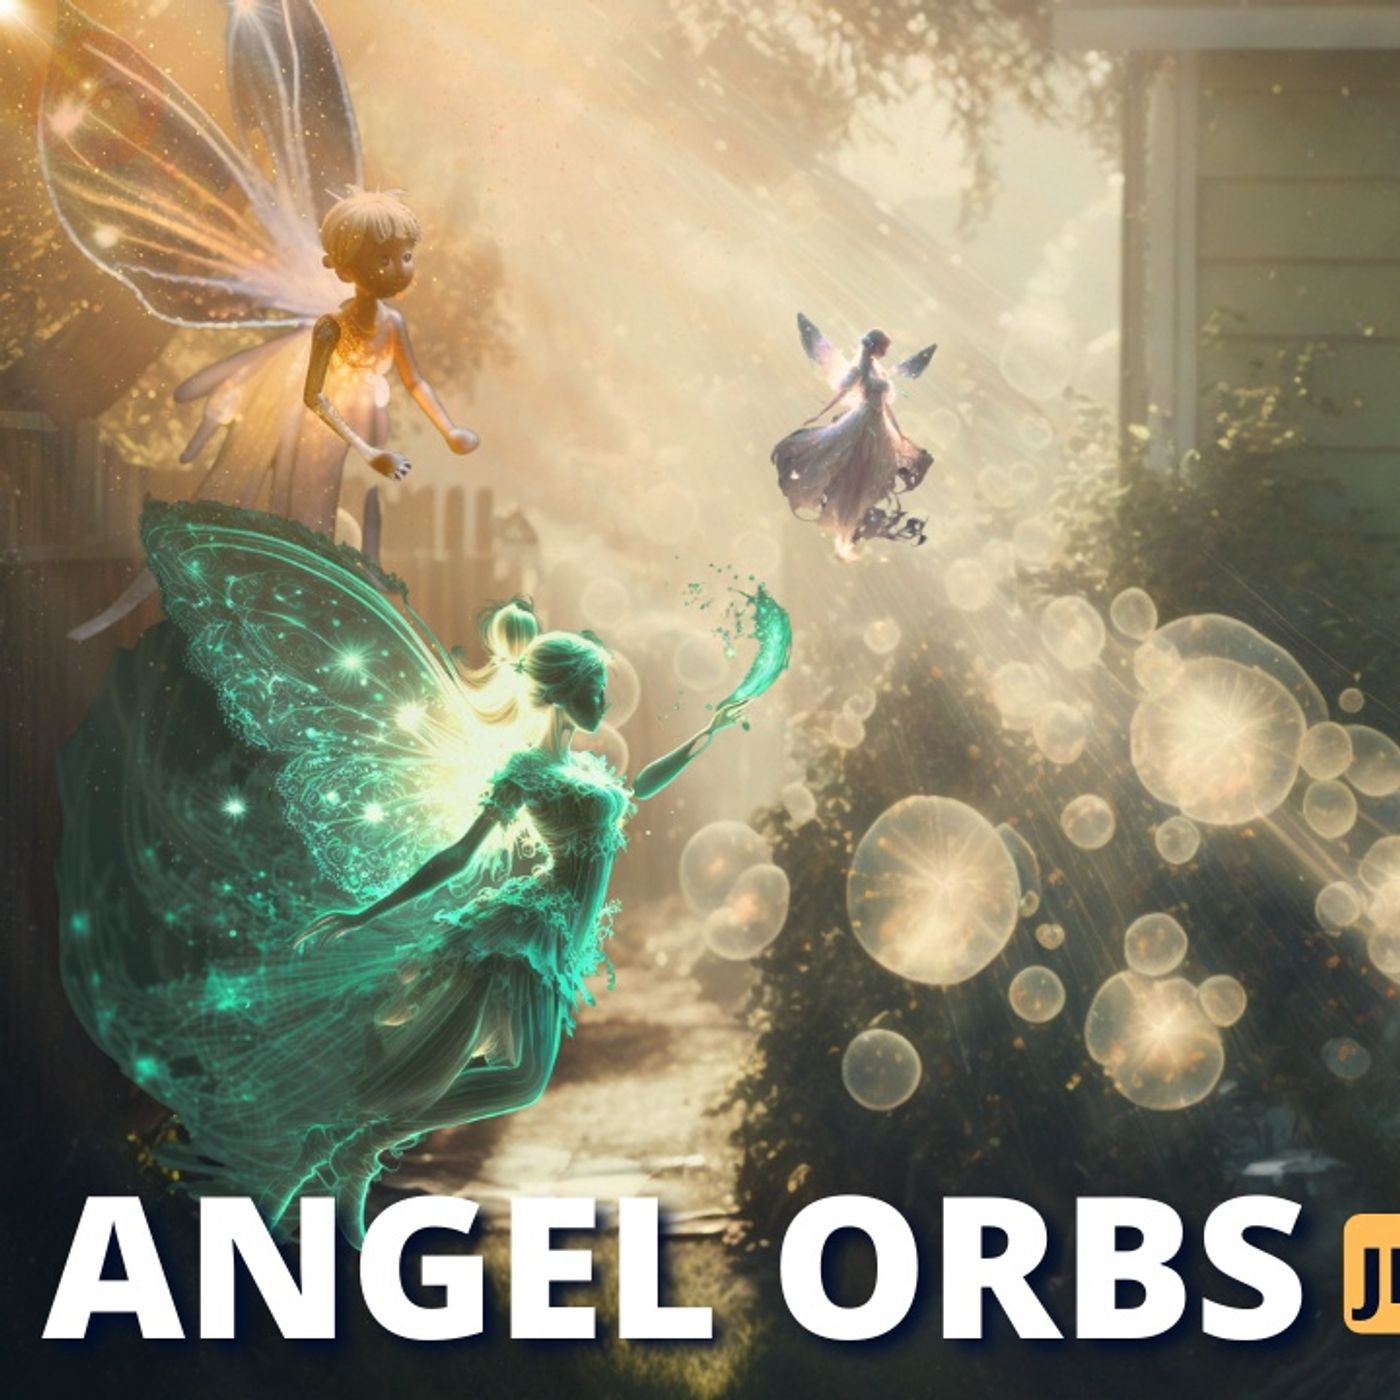 Orb Angels And Fairies Are Real! We’ve Got Them On Camera! | Jennifer Battershill & TruthSeekah